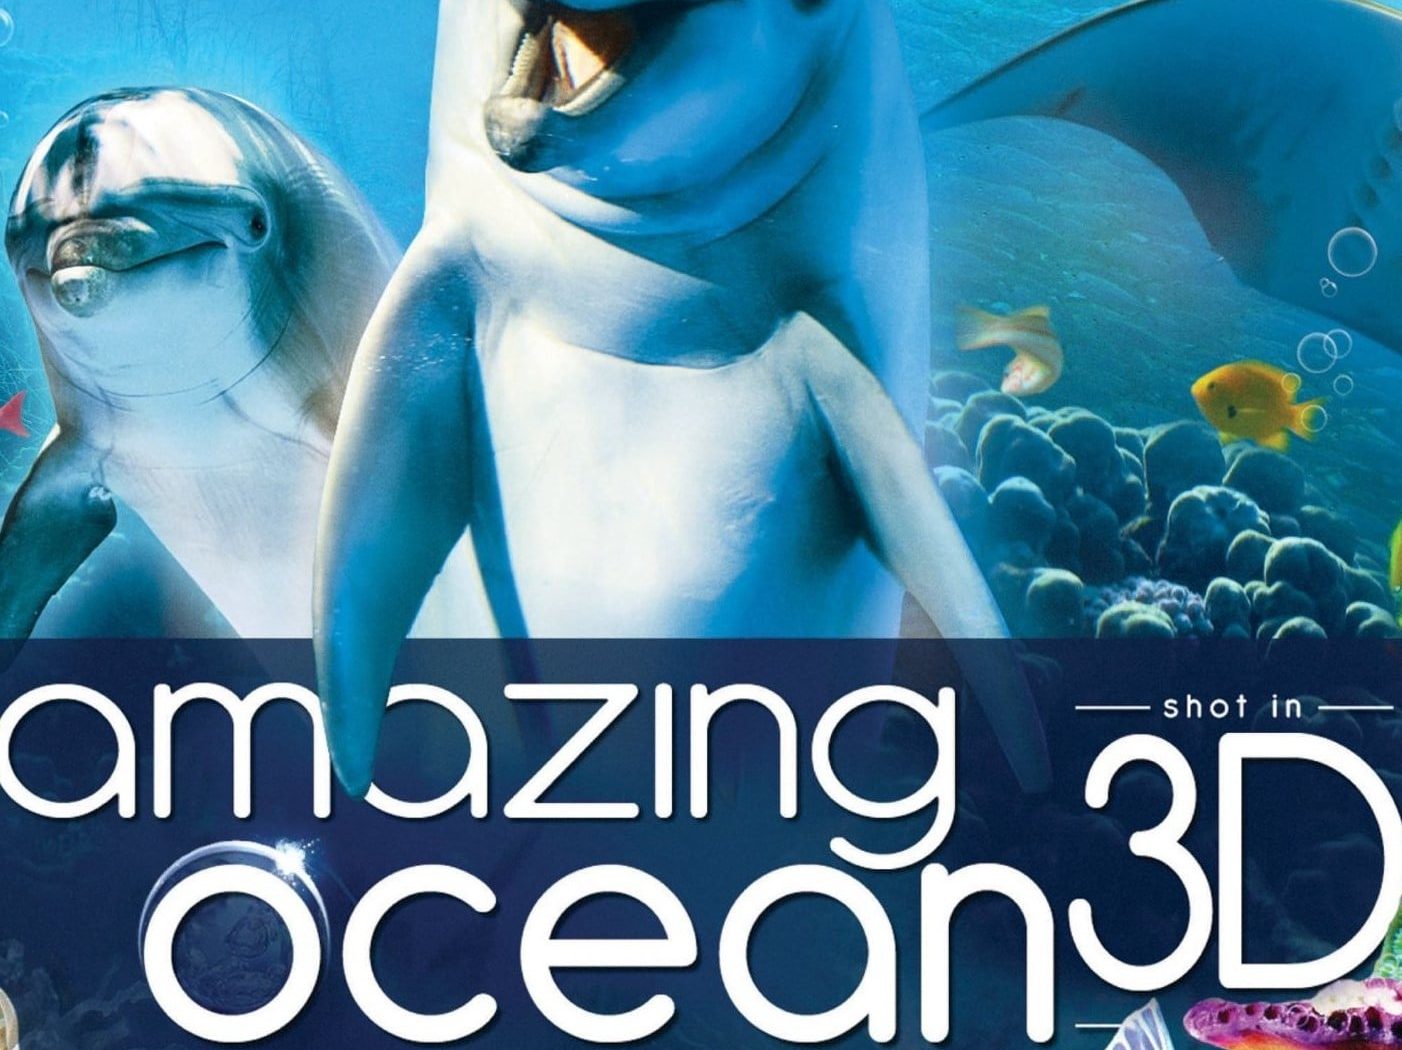 Poster for the movie "Amazing Ocean 3D"